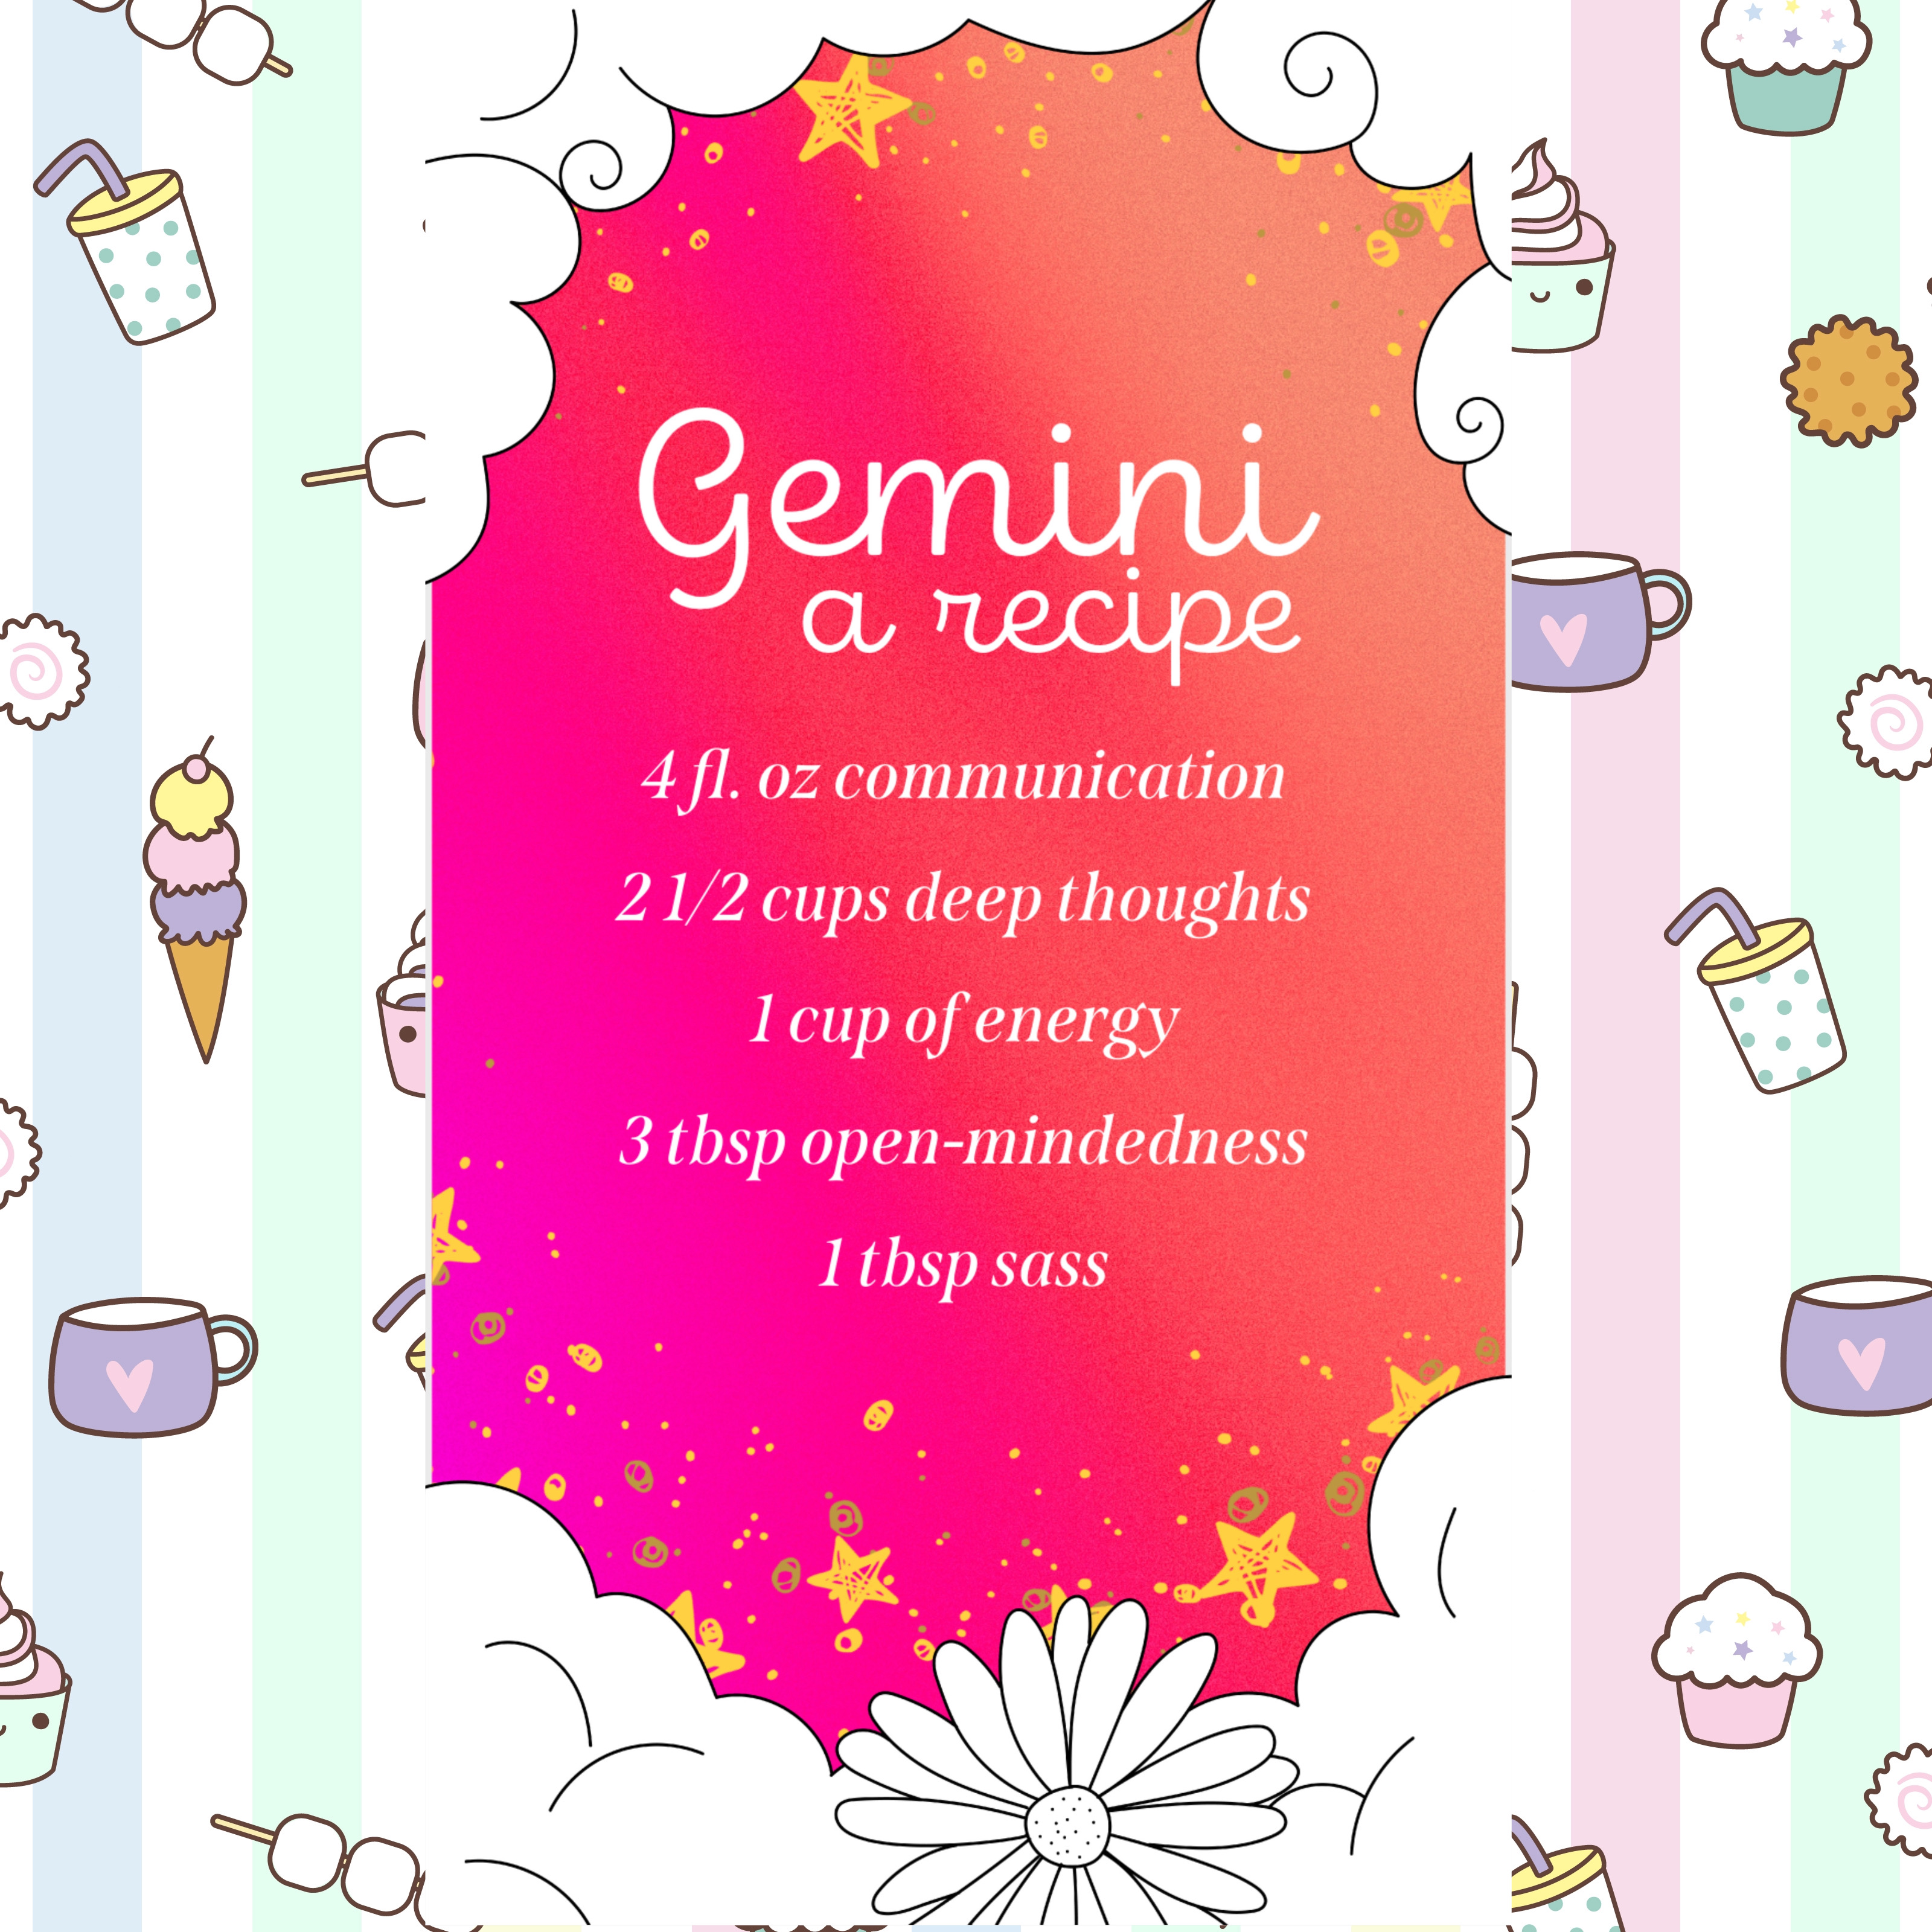 a recipe card with text